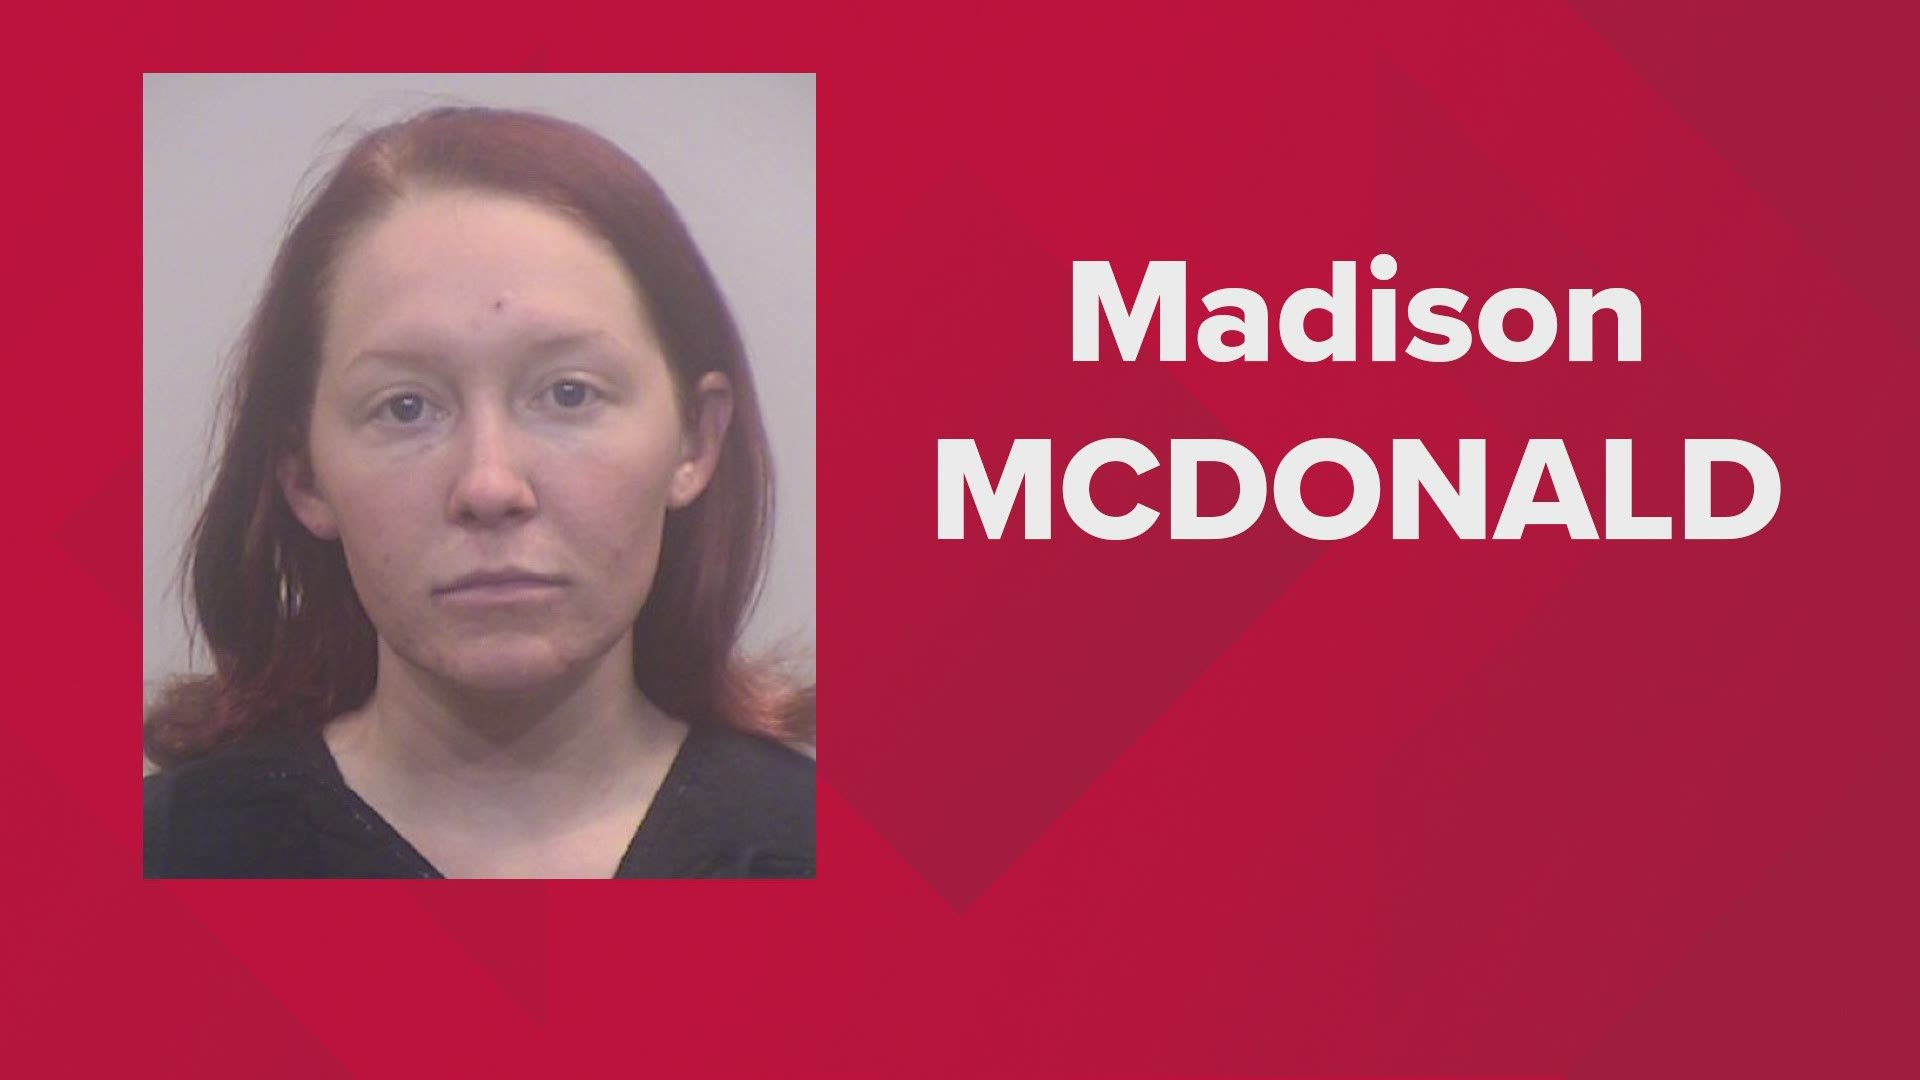 Madison McDonald, 30, faces two capital murder charges in the deaths of her two daughters who were 1 and 6 years old, police said.